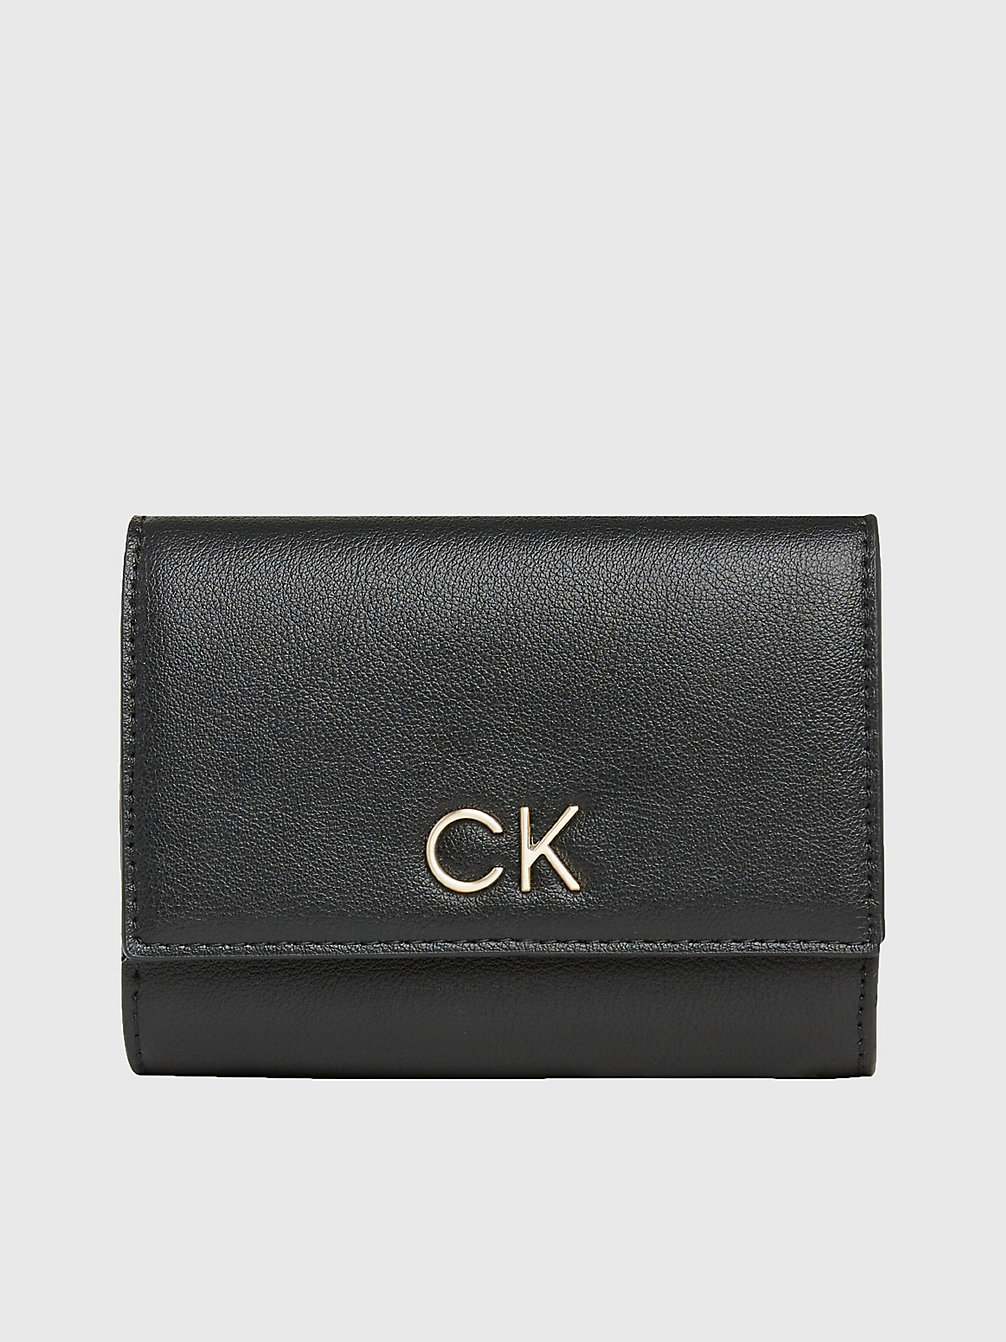 CK BLACK Recycled Trifold Wallet undefined women Calvin Klein